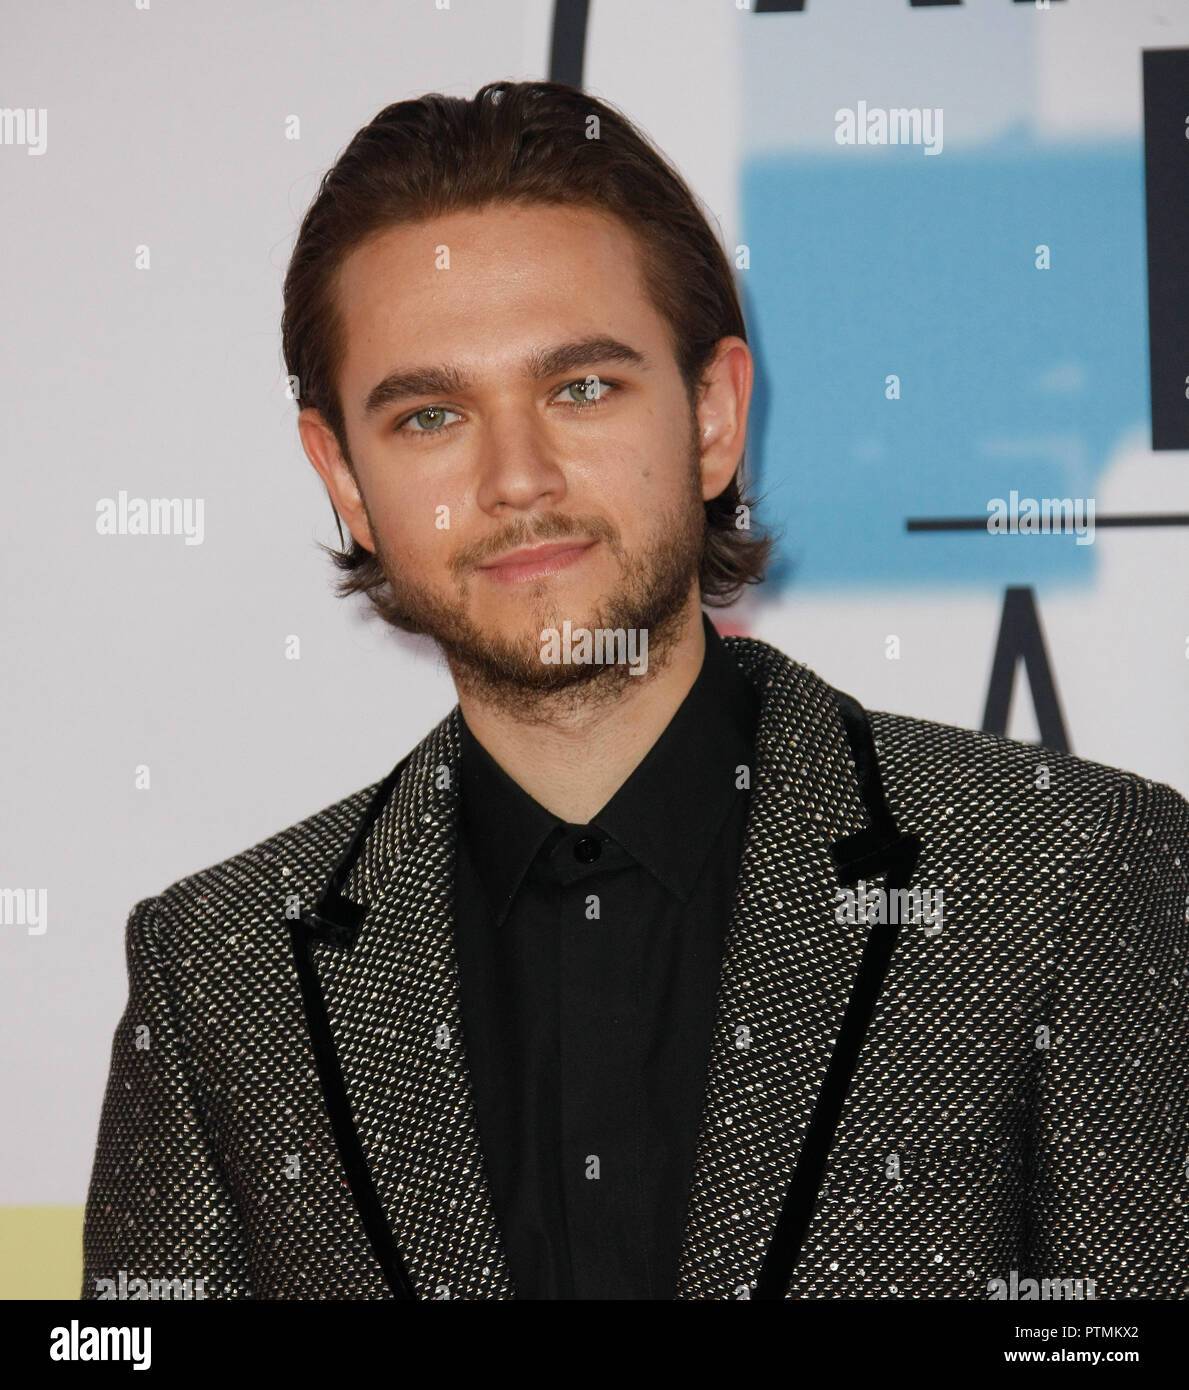 LOS ANGELES, CA - OCTOBER 09: Zedd attends the 2018 American Music Awards at Microsoft Theater on October 9, 2018 in Los Angeles, California.   (Photo by imageSPACE/MediaPunch) Stock Photo